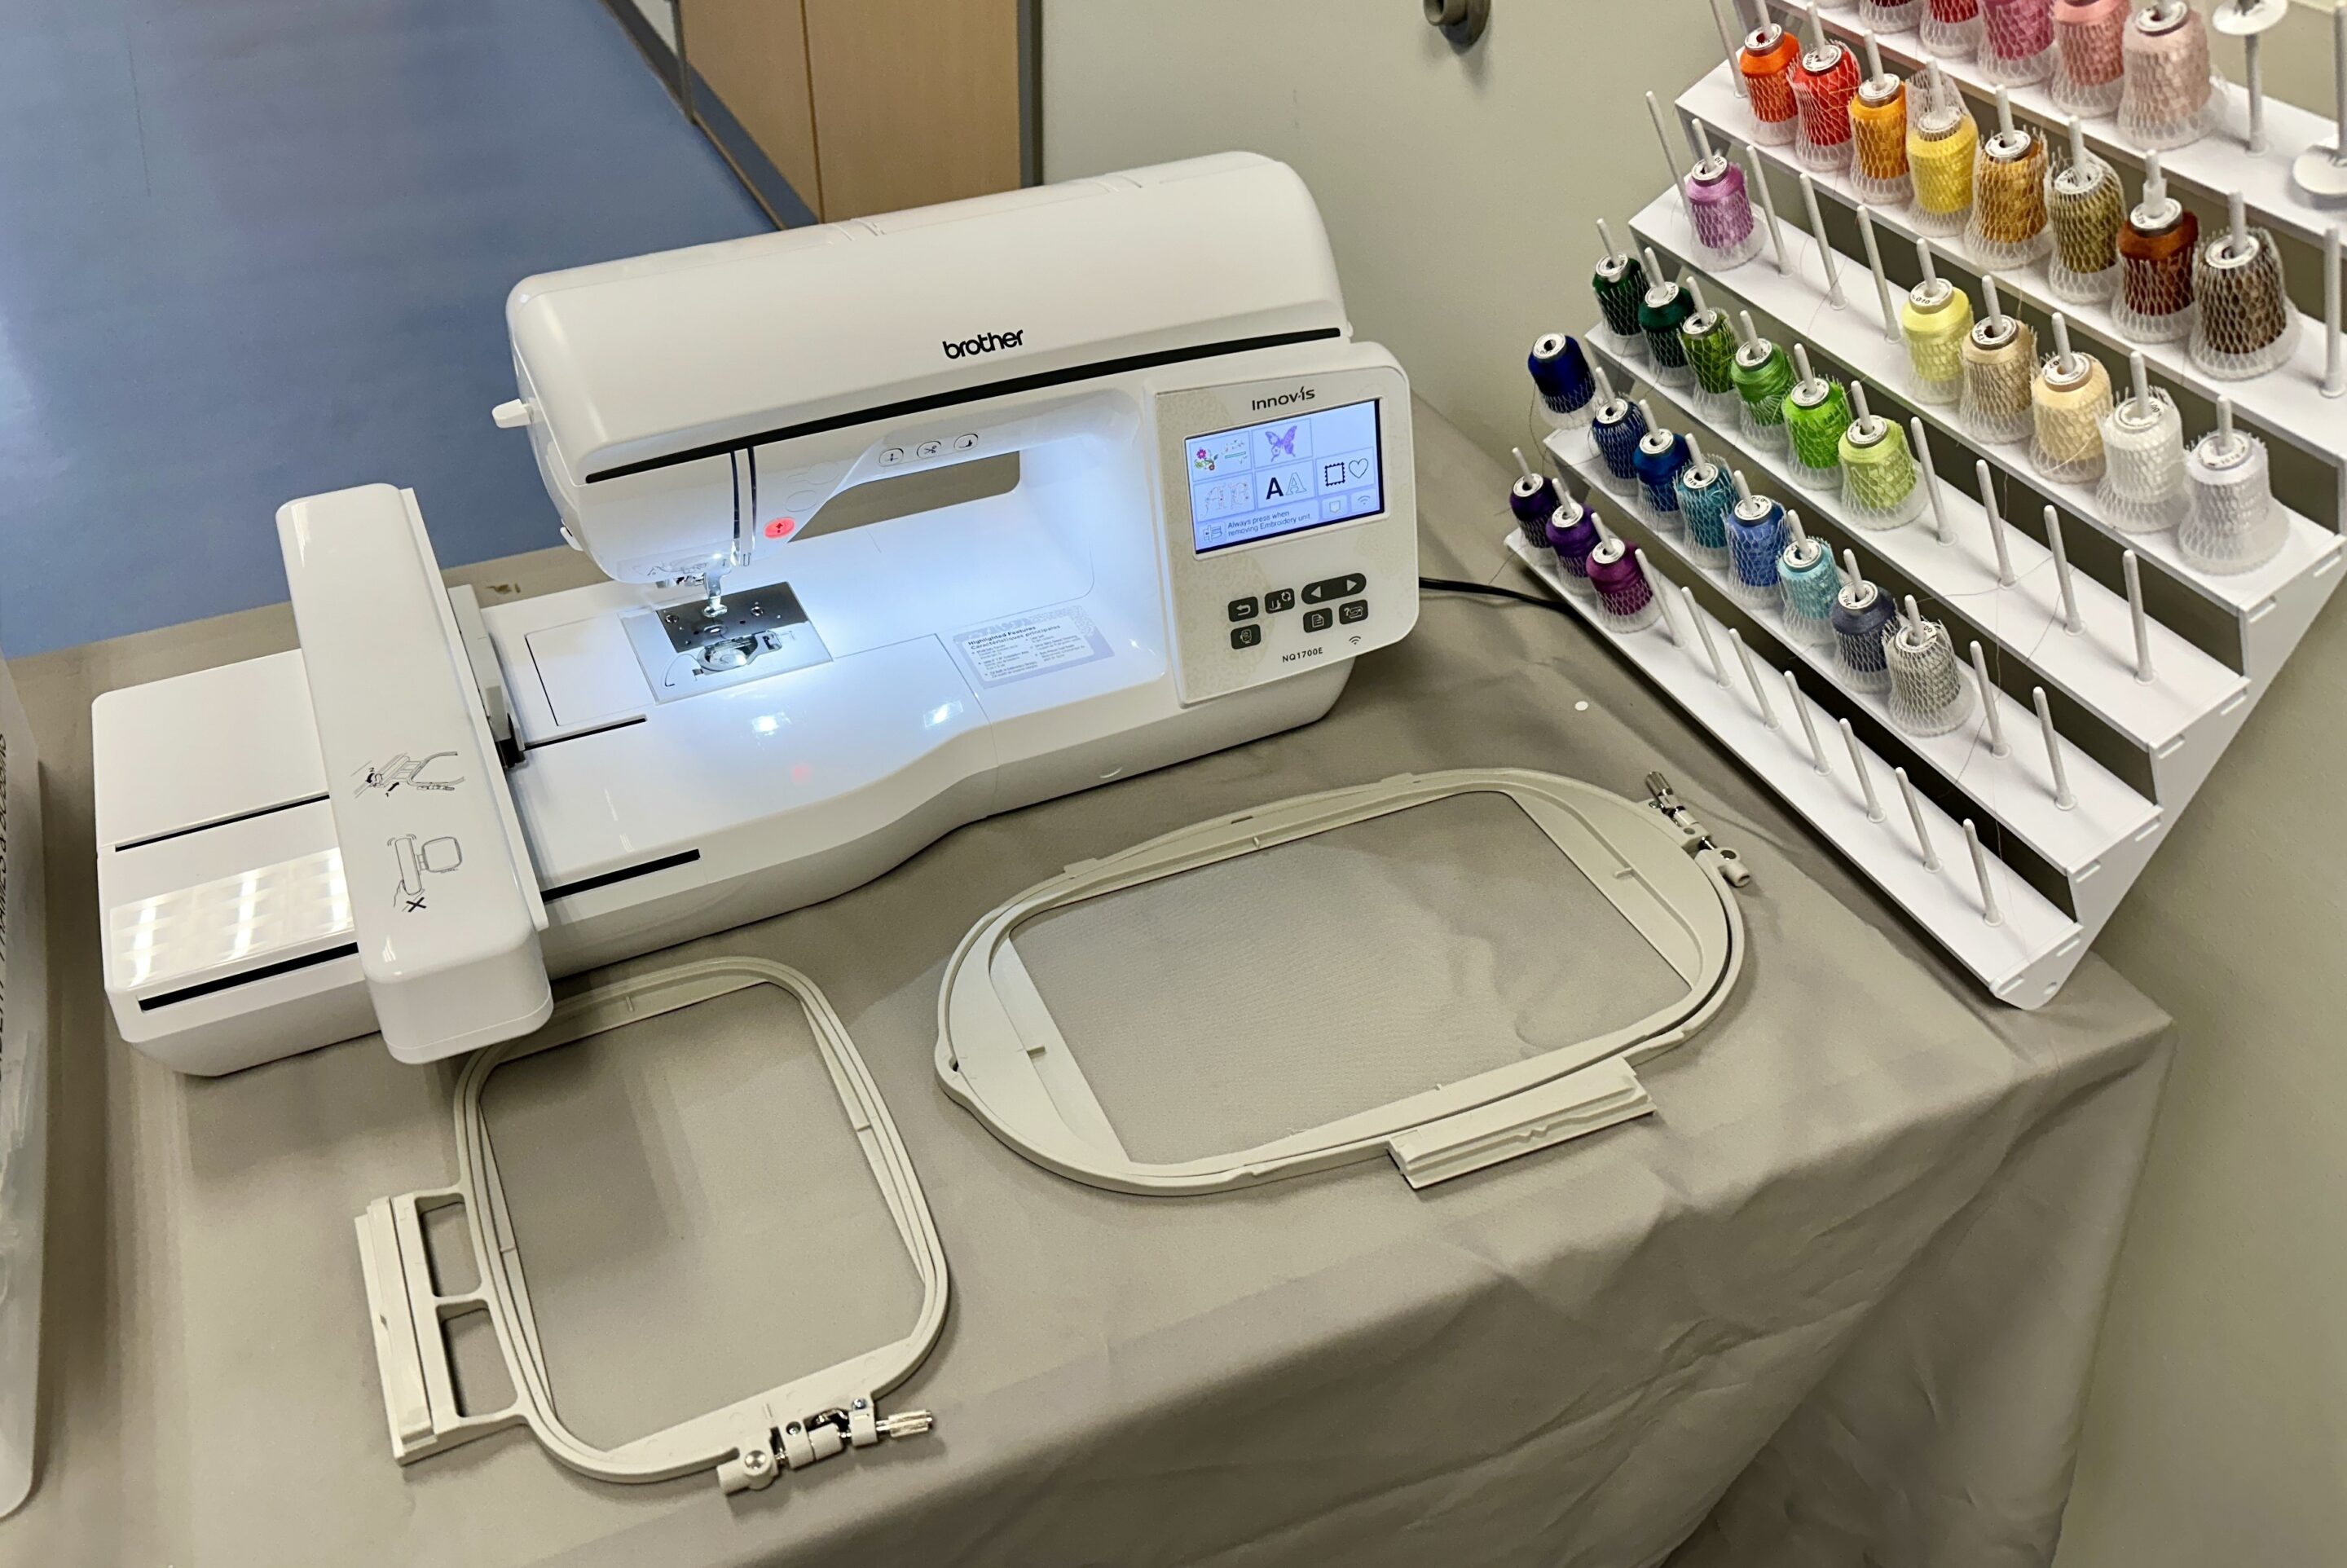 A photo of Ignite's new embroidery machine, two large hoops for the machine, and a selection of colorful embroidery thread.